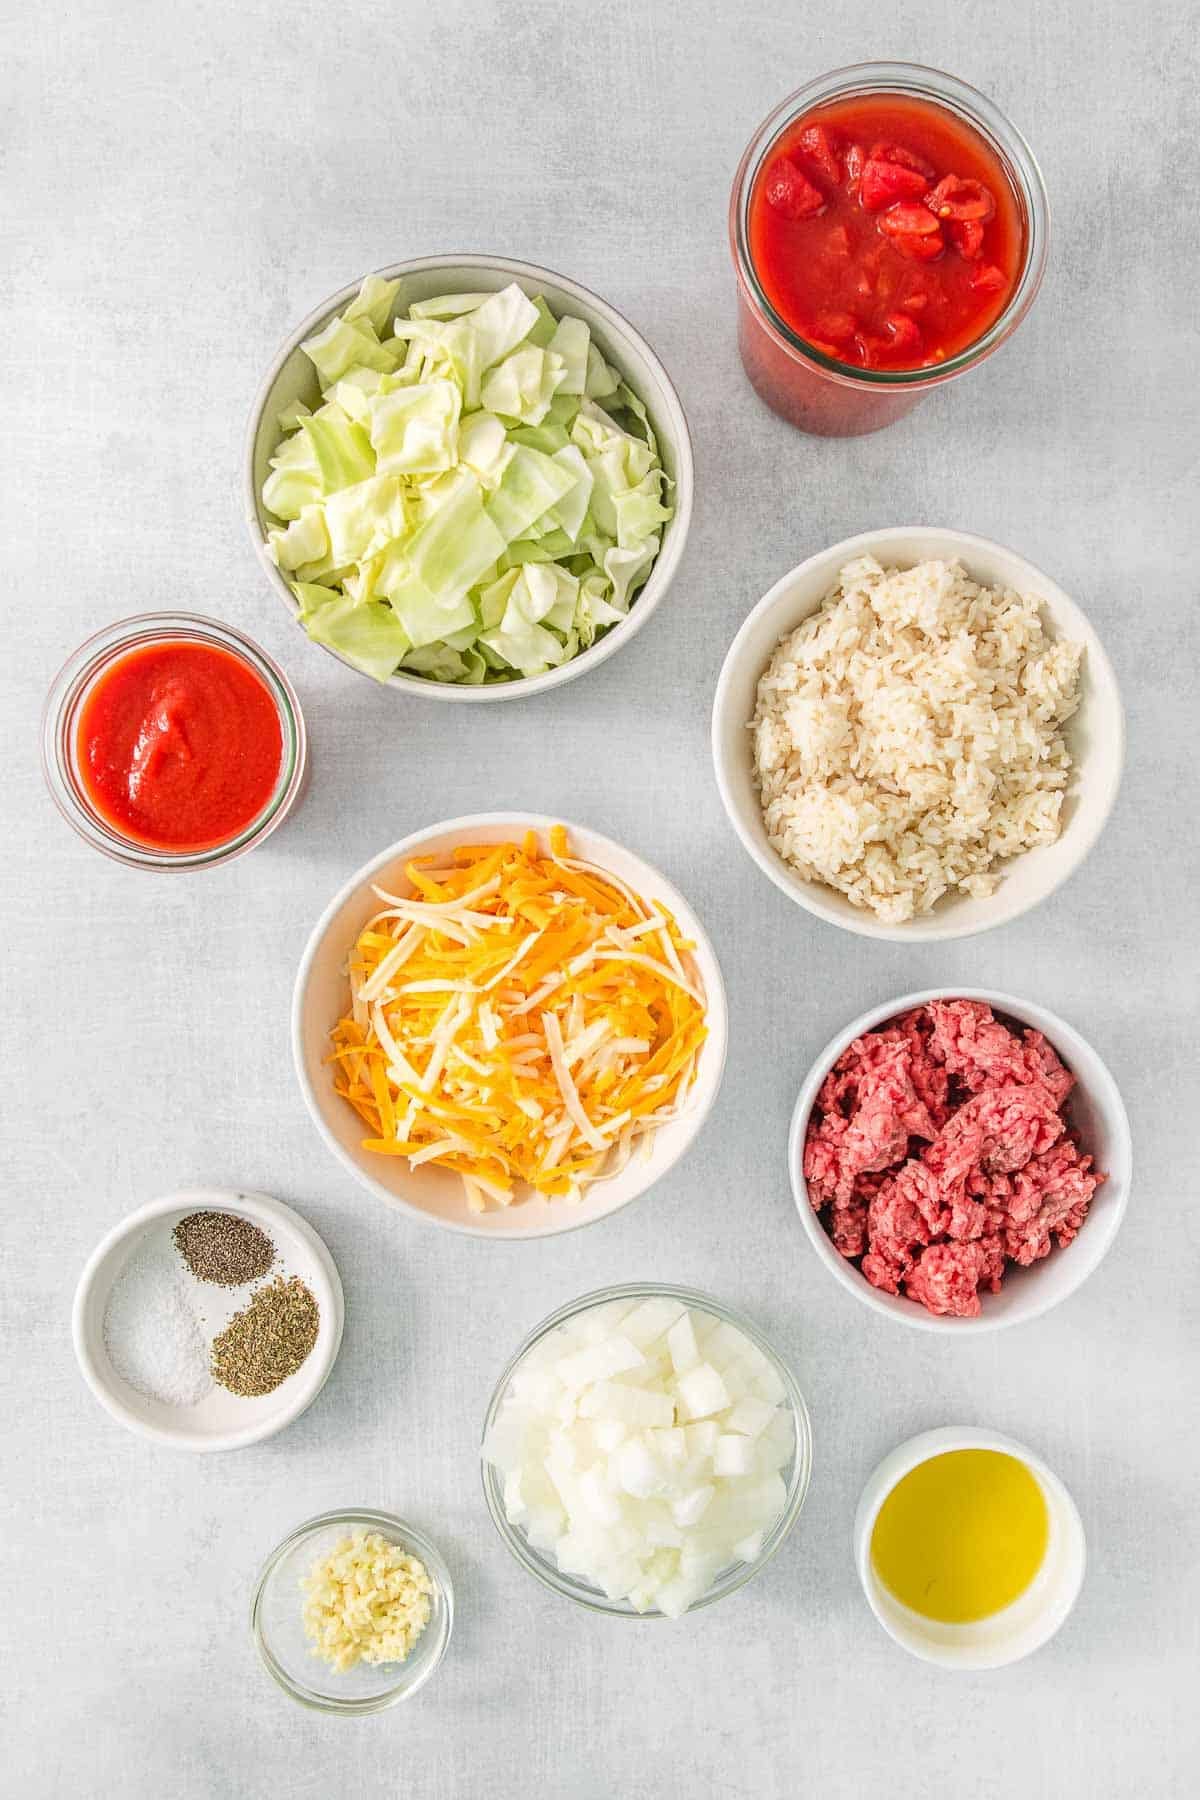 bowls containing ingredients for cabbage roll casserole - Olive oil, green cabbage, salt, ground beef, onion, garlic, tomatoes, tomato sauce, Italian dressing, black pepper, white rice and shredded cheese.